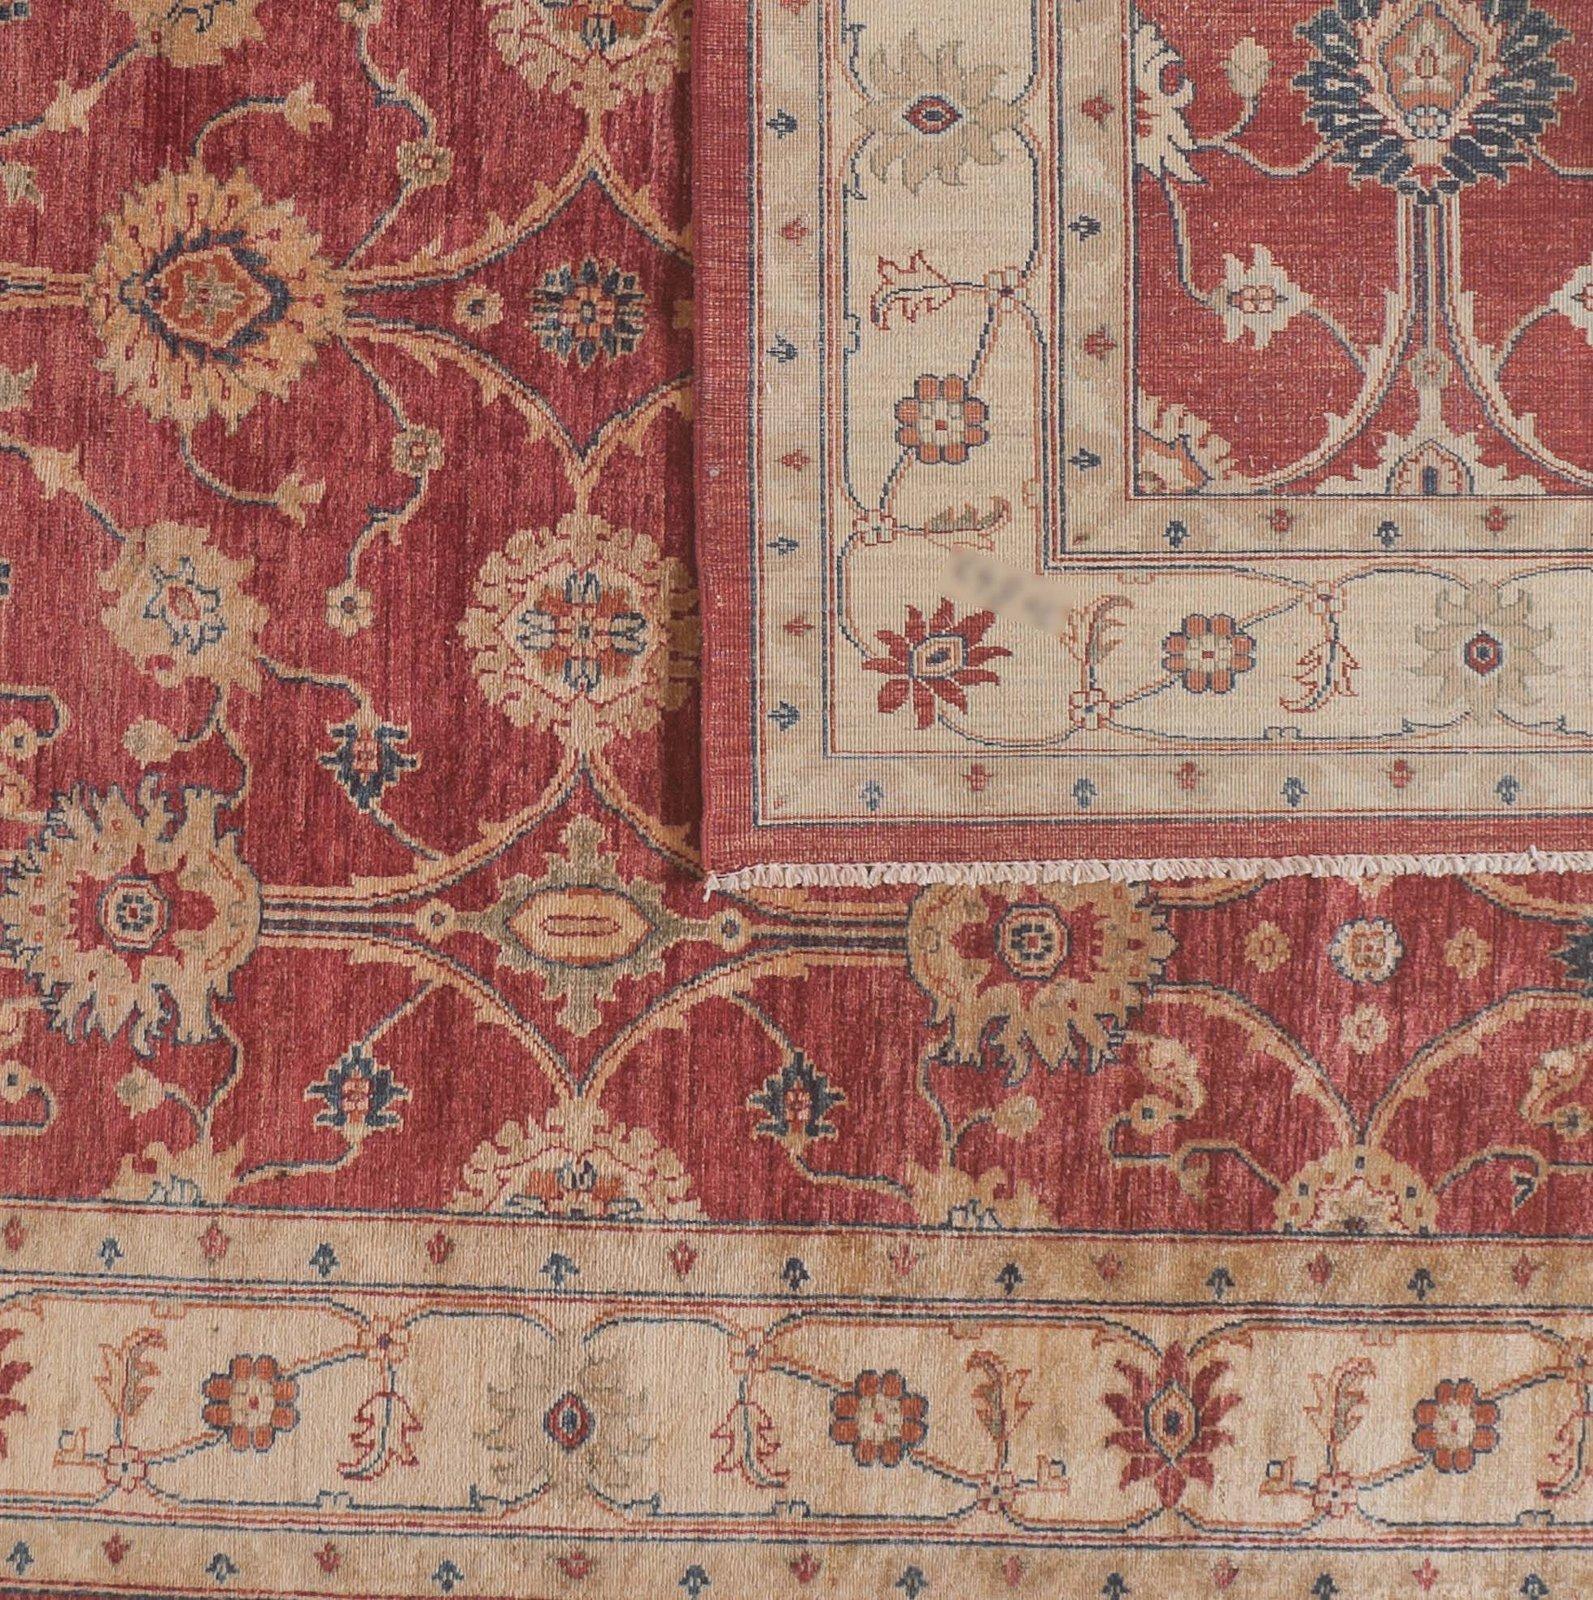 Teal lines and leaves add a distinctive color element to this traditional Pakistani floral rug in red and beige. Wool. Hand knotted in Pakistan using vegetal dyes.